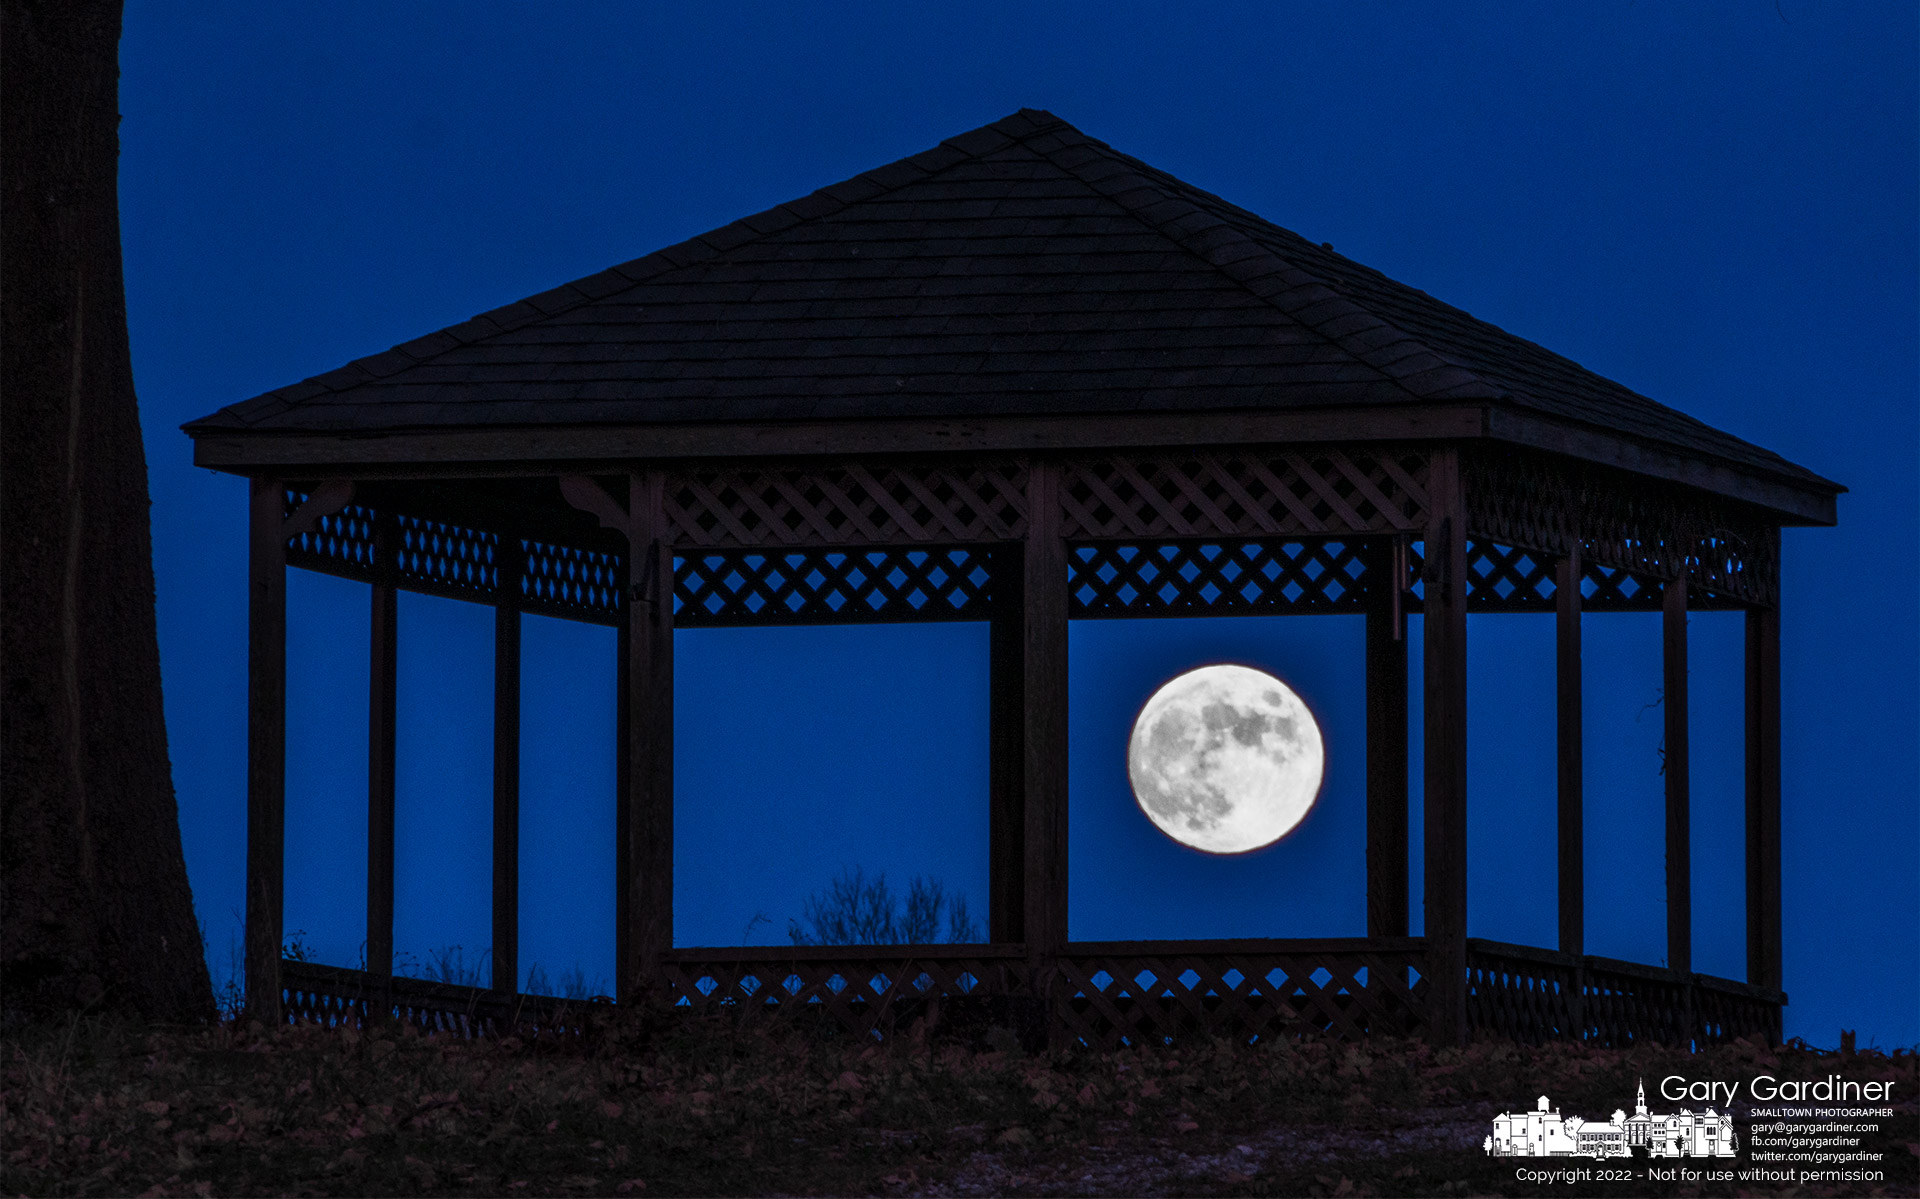 The full moon rises over the farm field behind the gazebo at the abandoned Sharp Farm on Afrida road. My Final Photo for November 7, 2022.